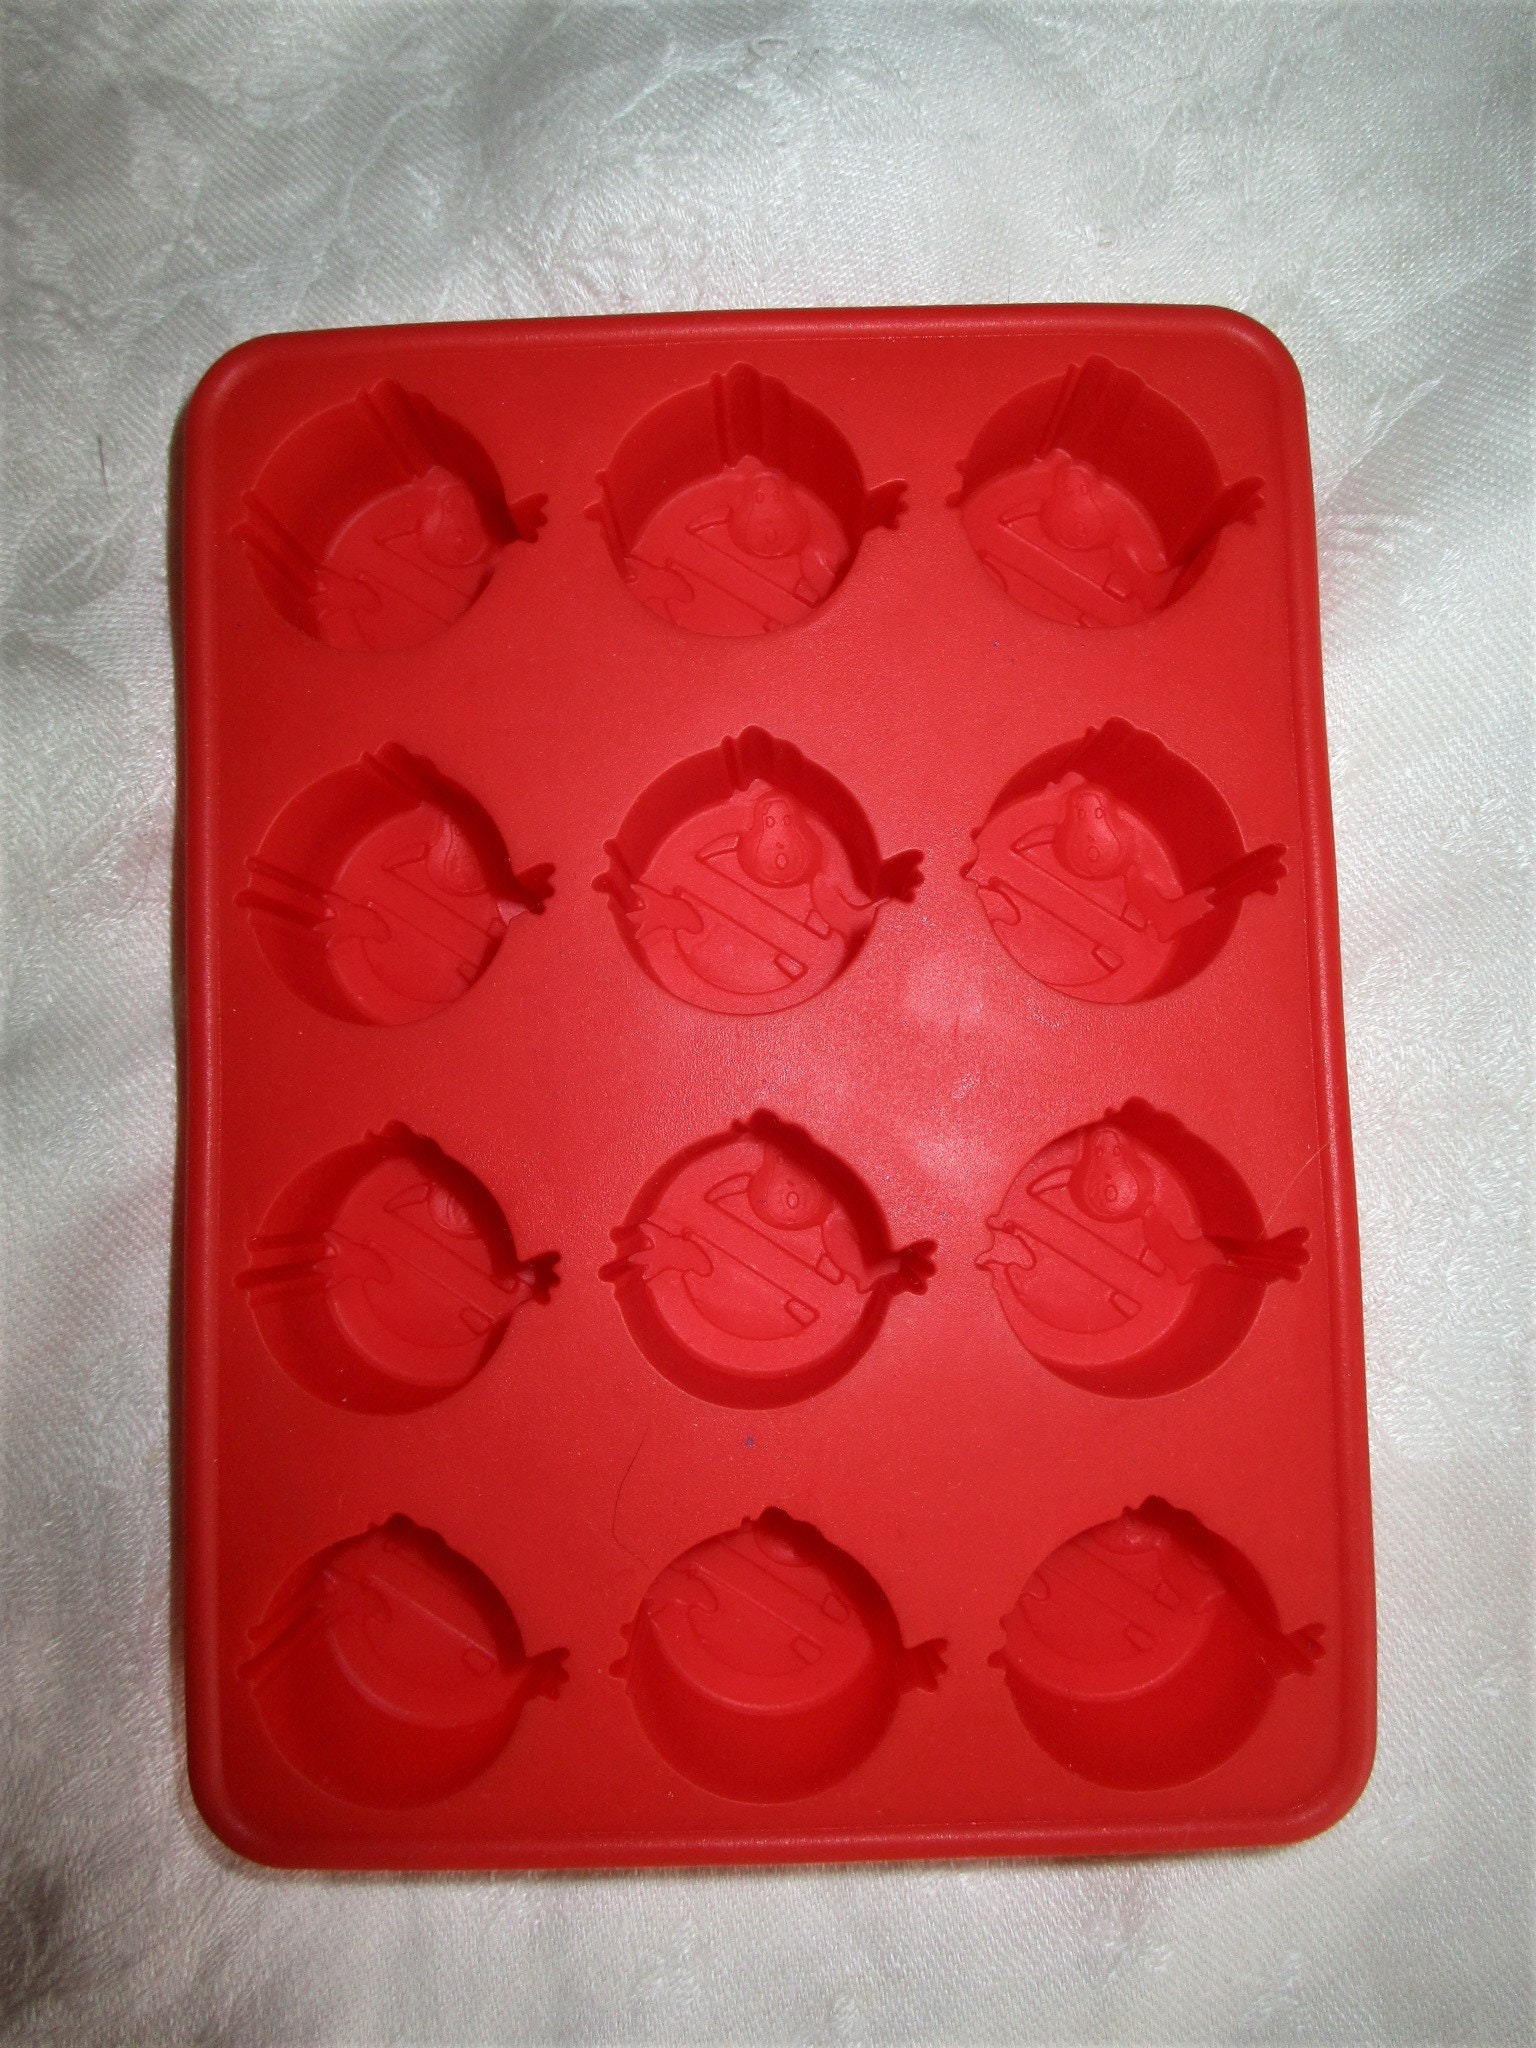 Silicone Ice Dice Container Ice Cube Mould Maker Garden Party Fruit